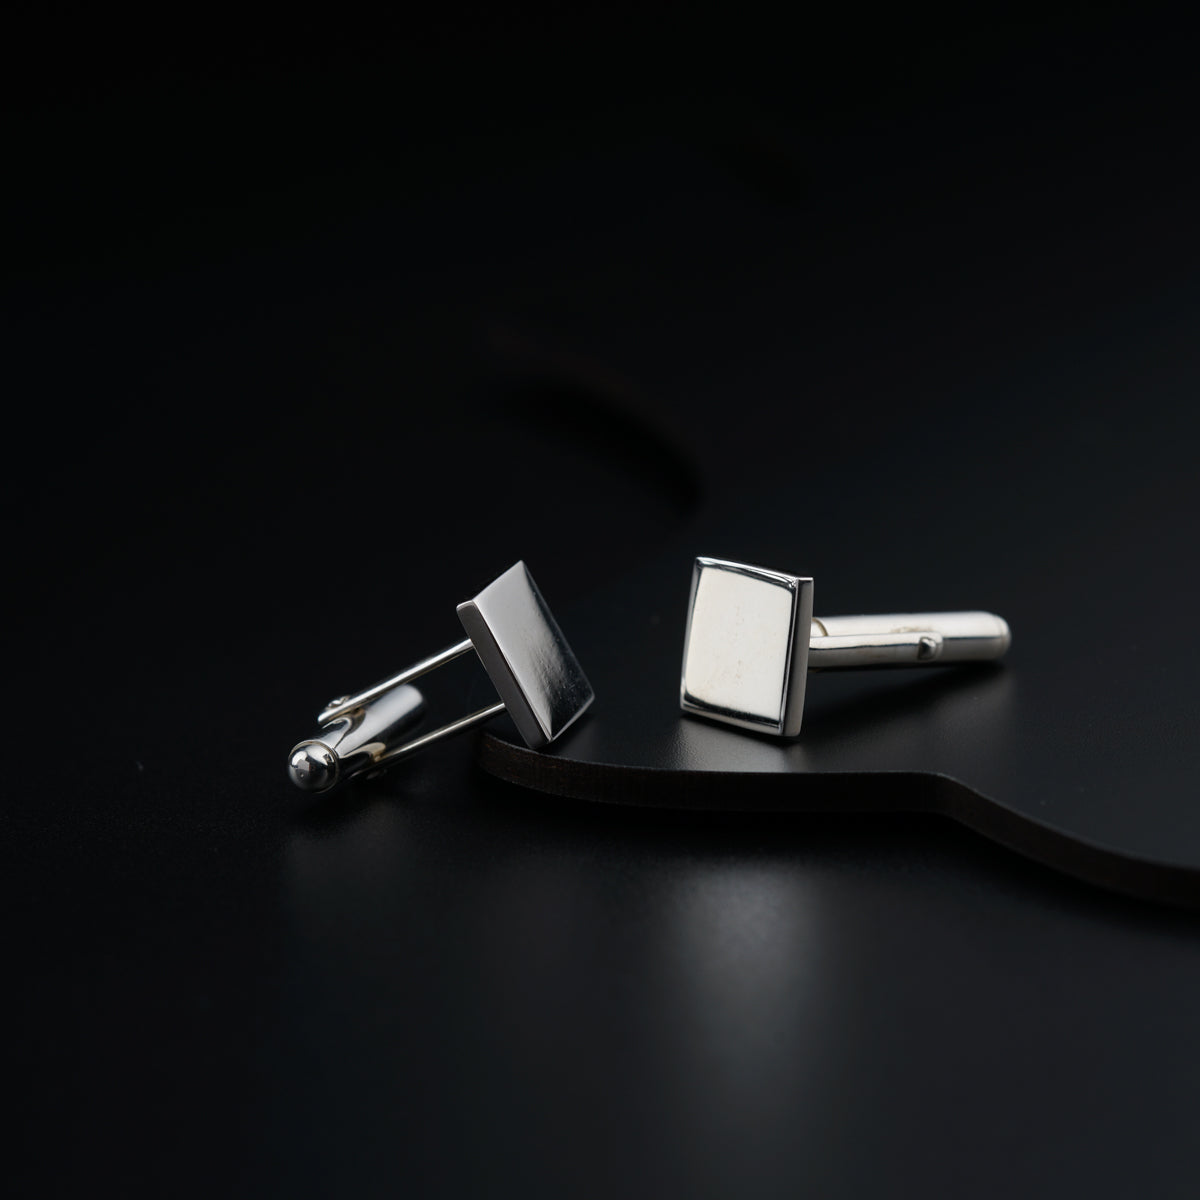 a pair of silver cufflinkes on a black surface